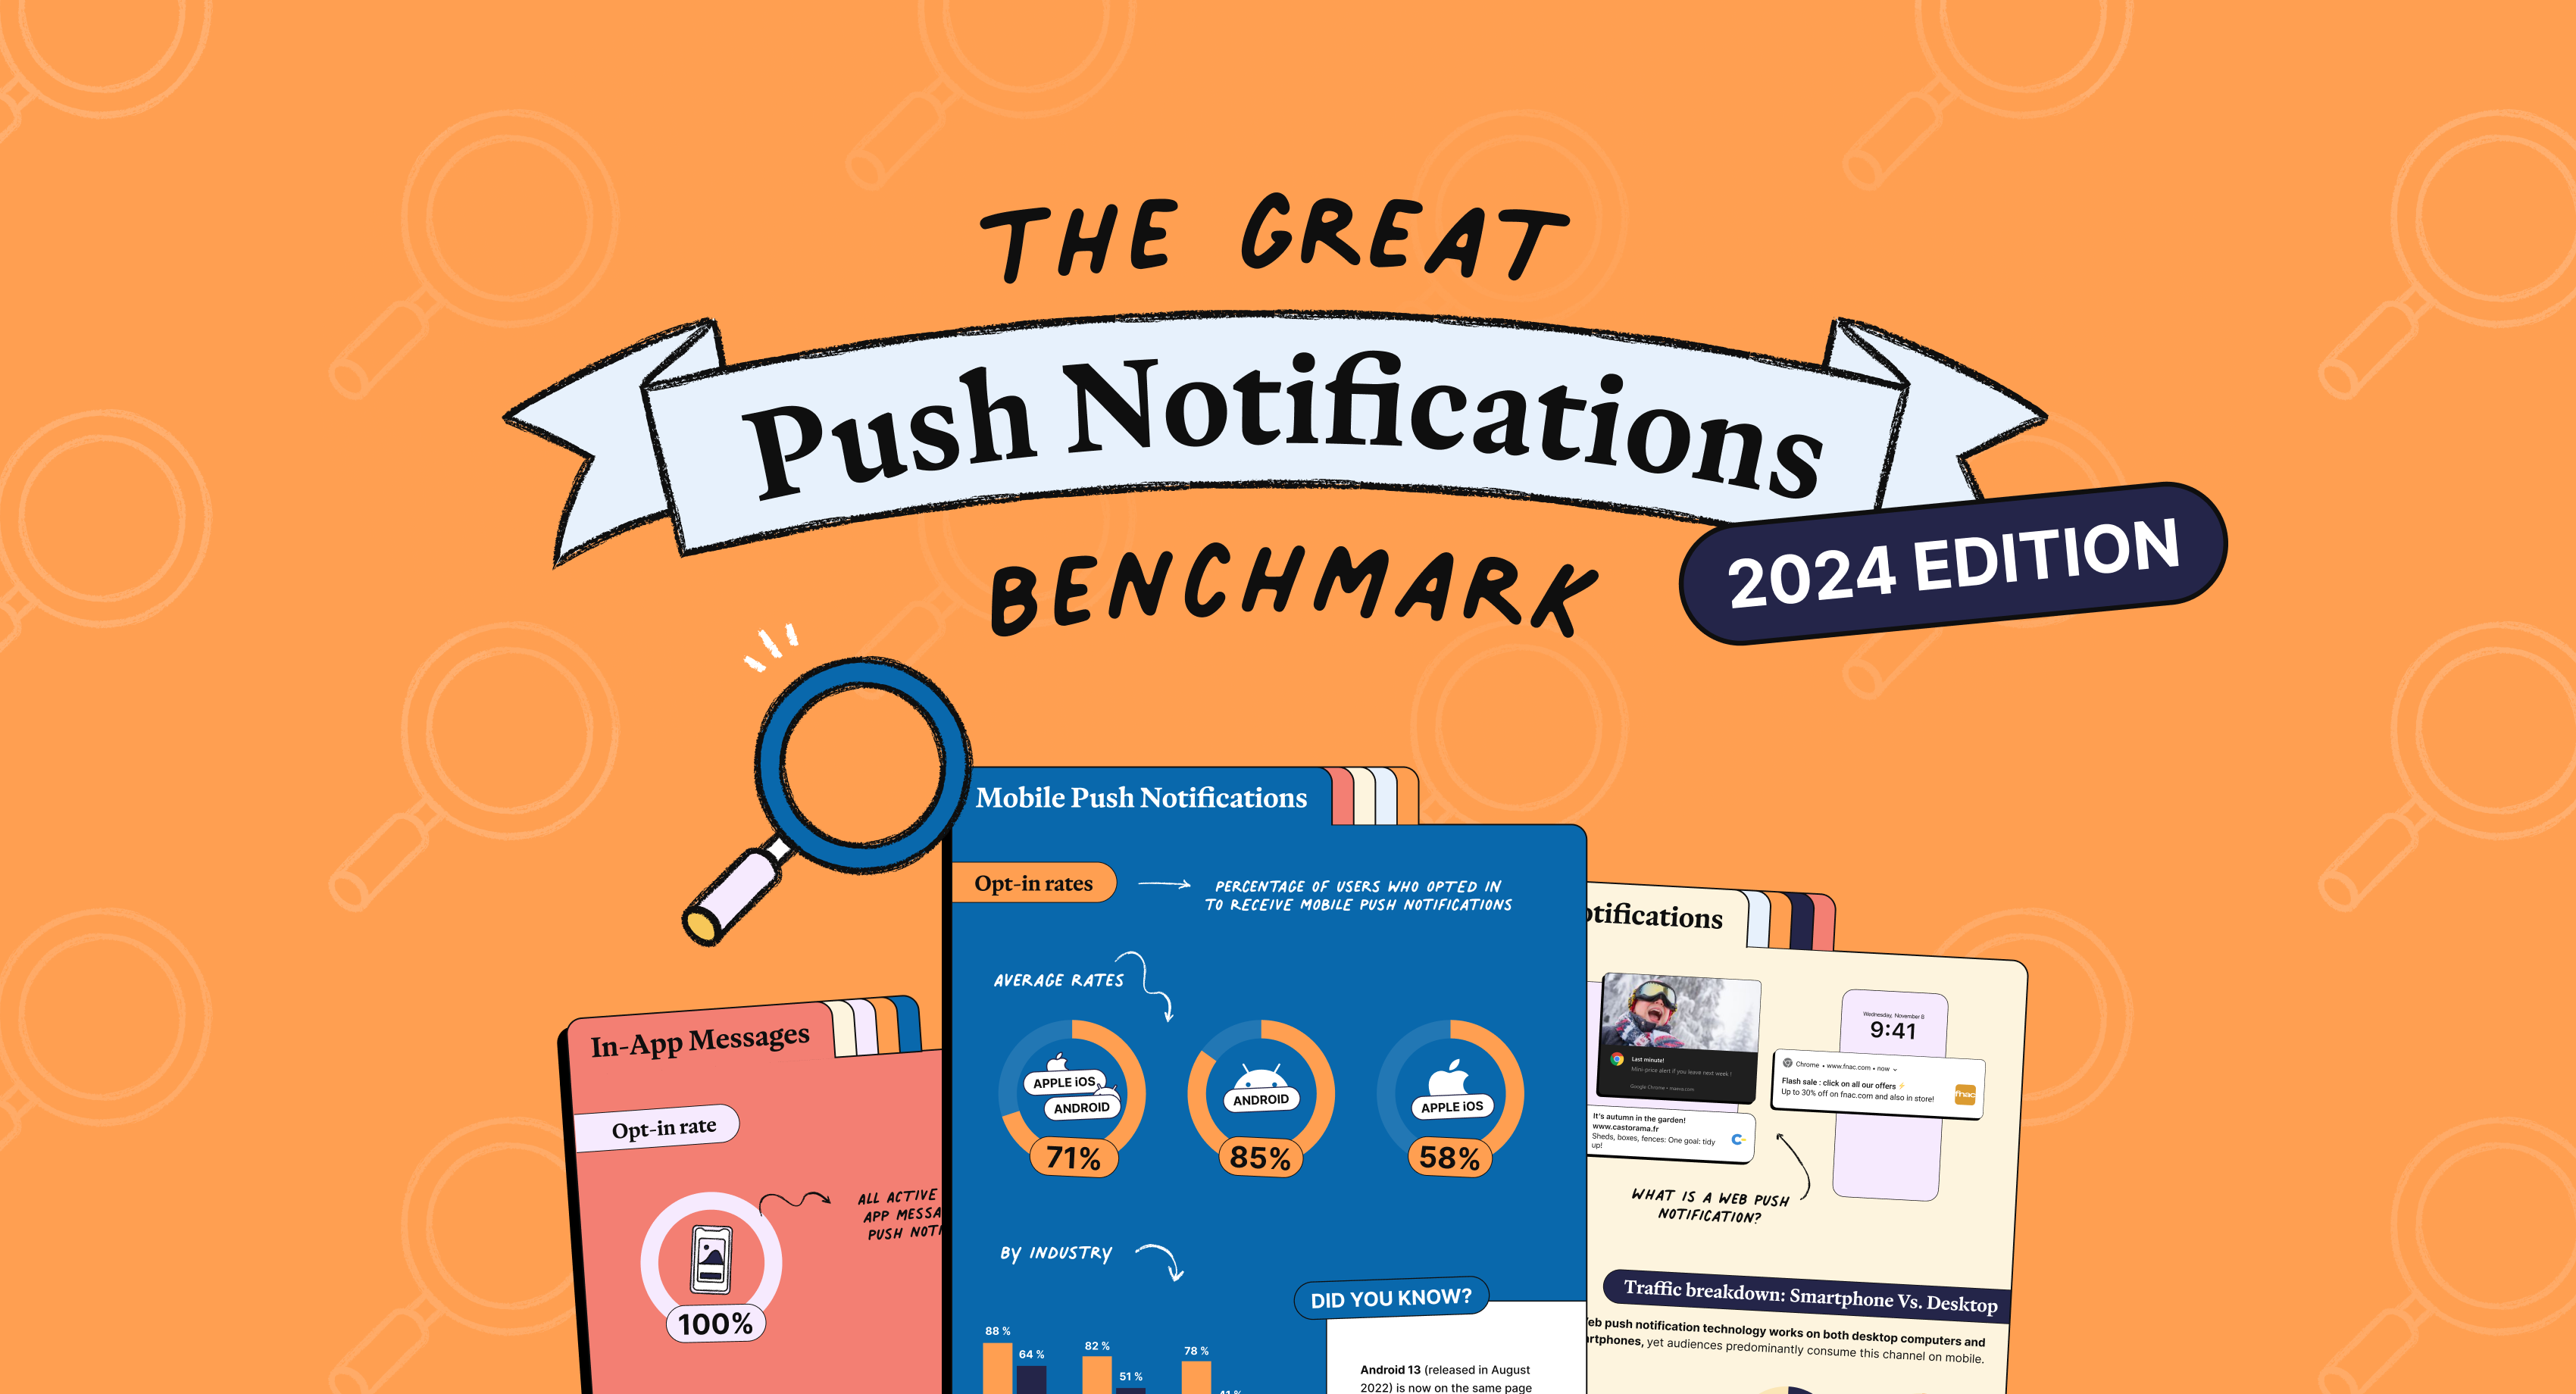 The Great Push Notifications Benchmark 2024